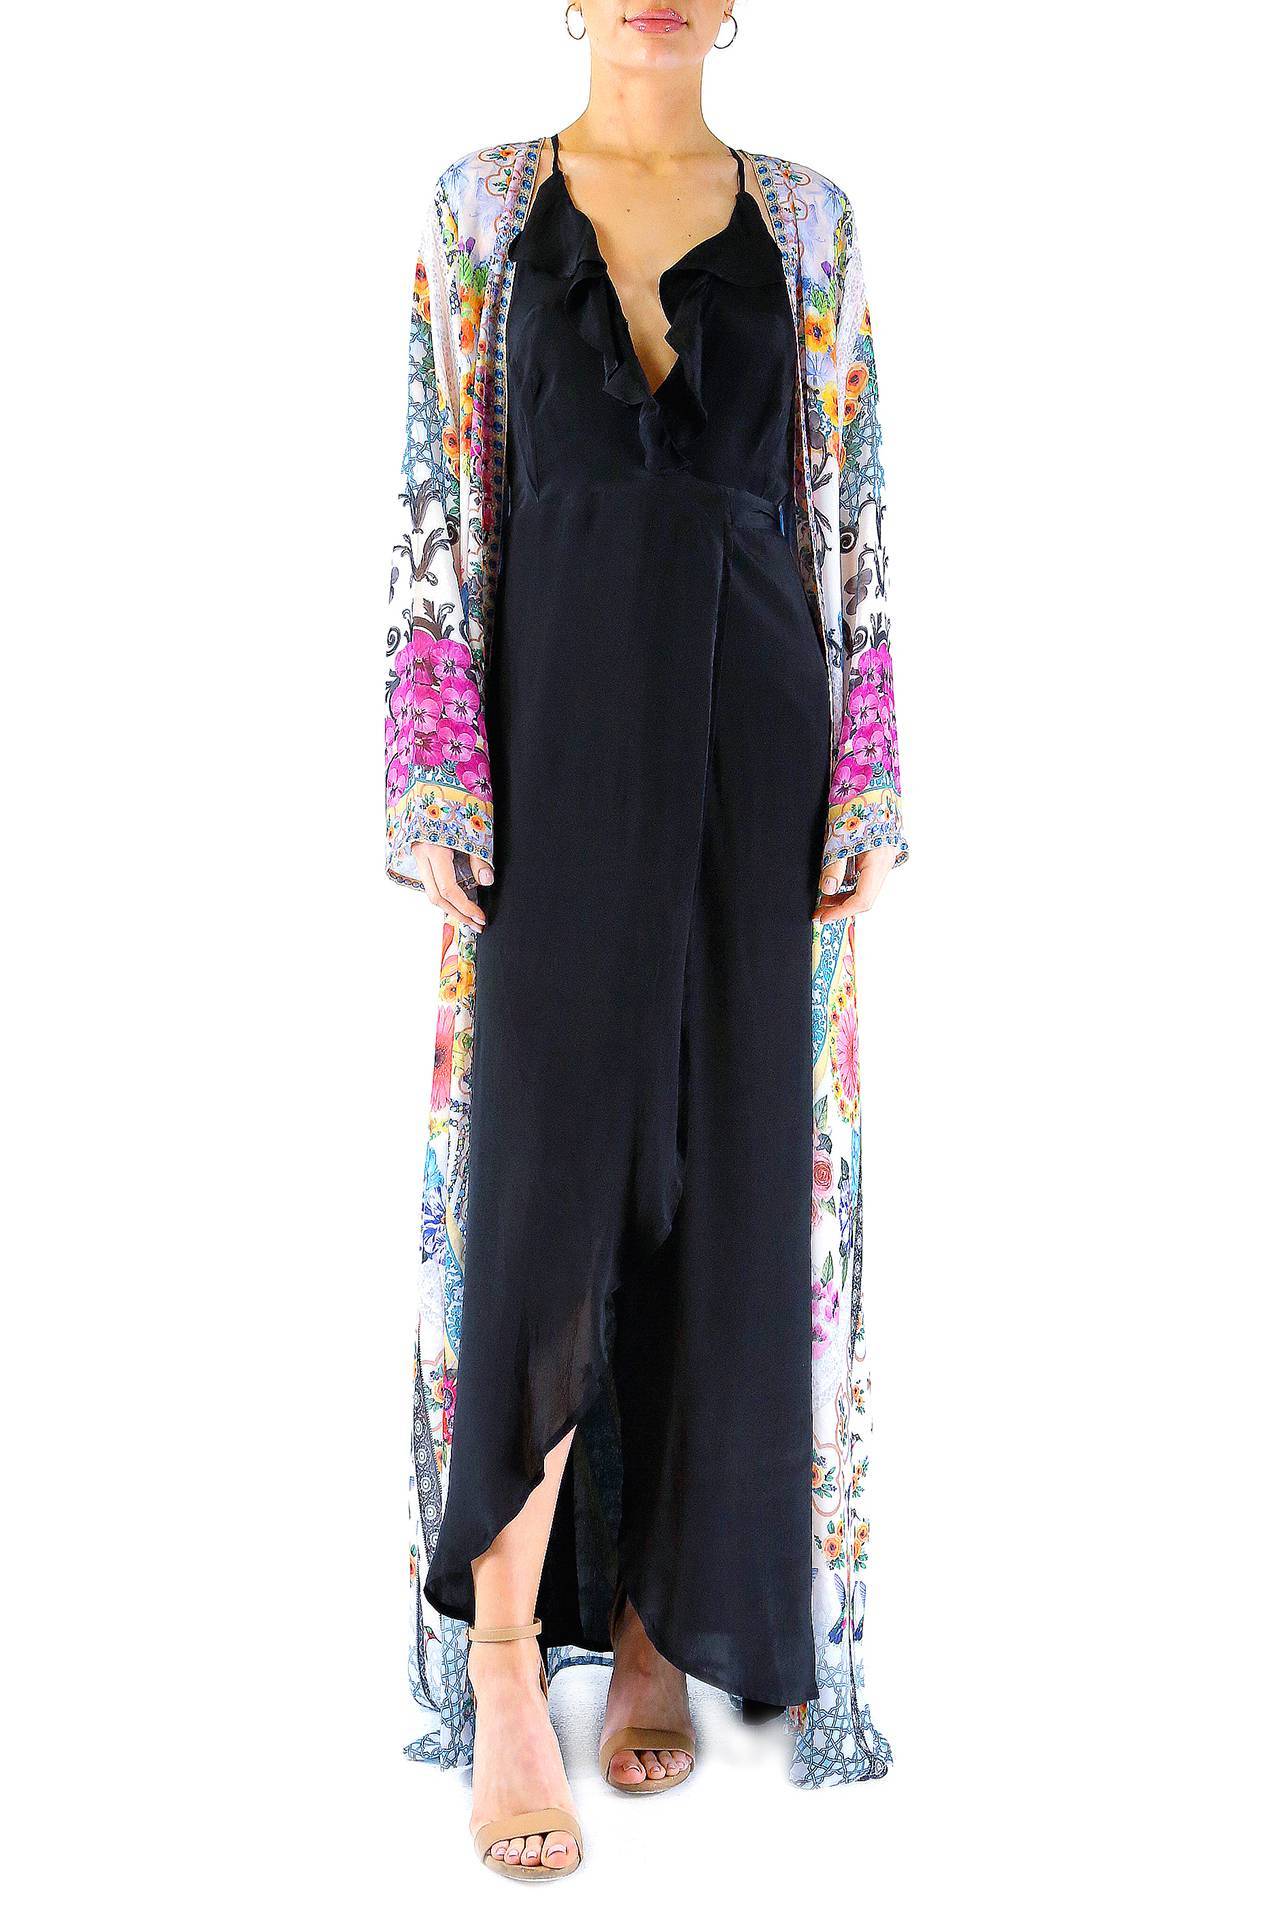 Sheer Long Duster in Floral Print - S'roushaa